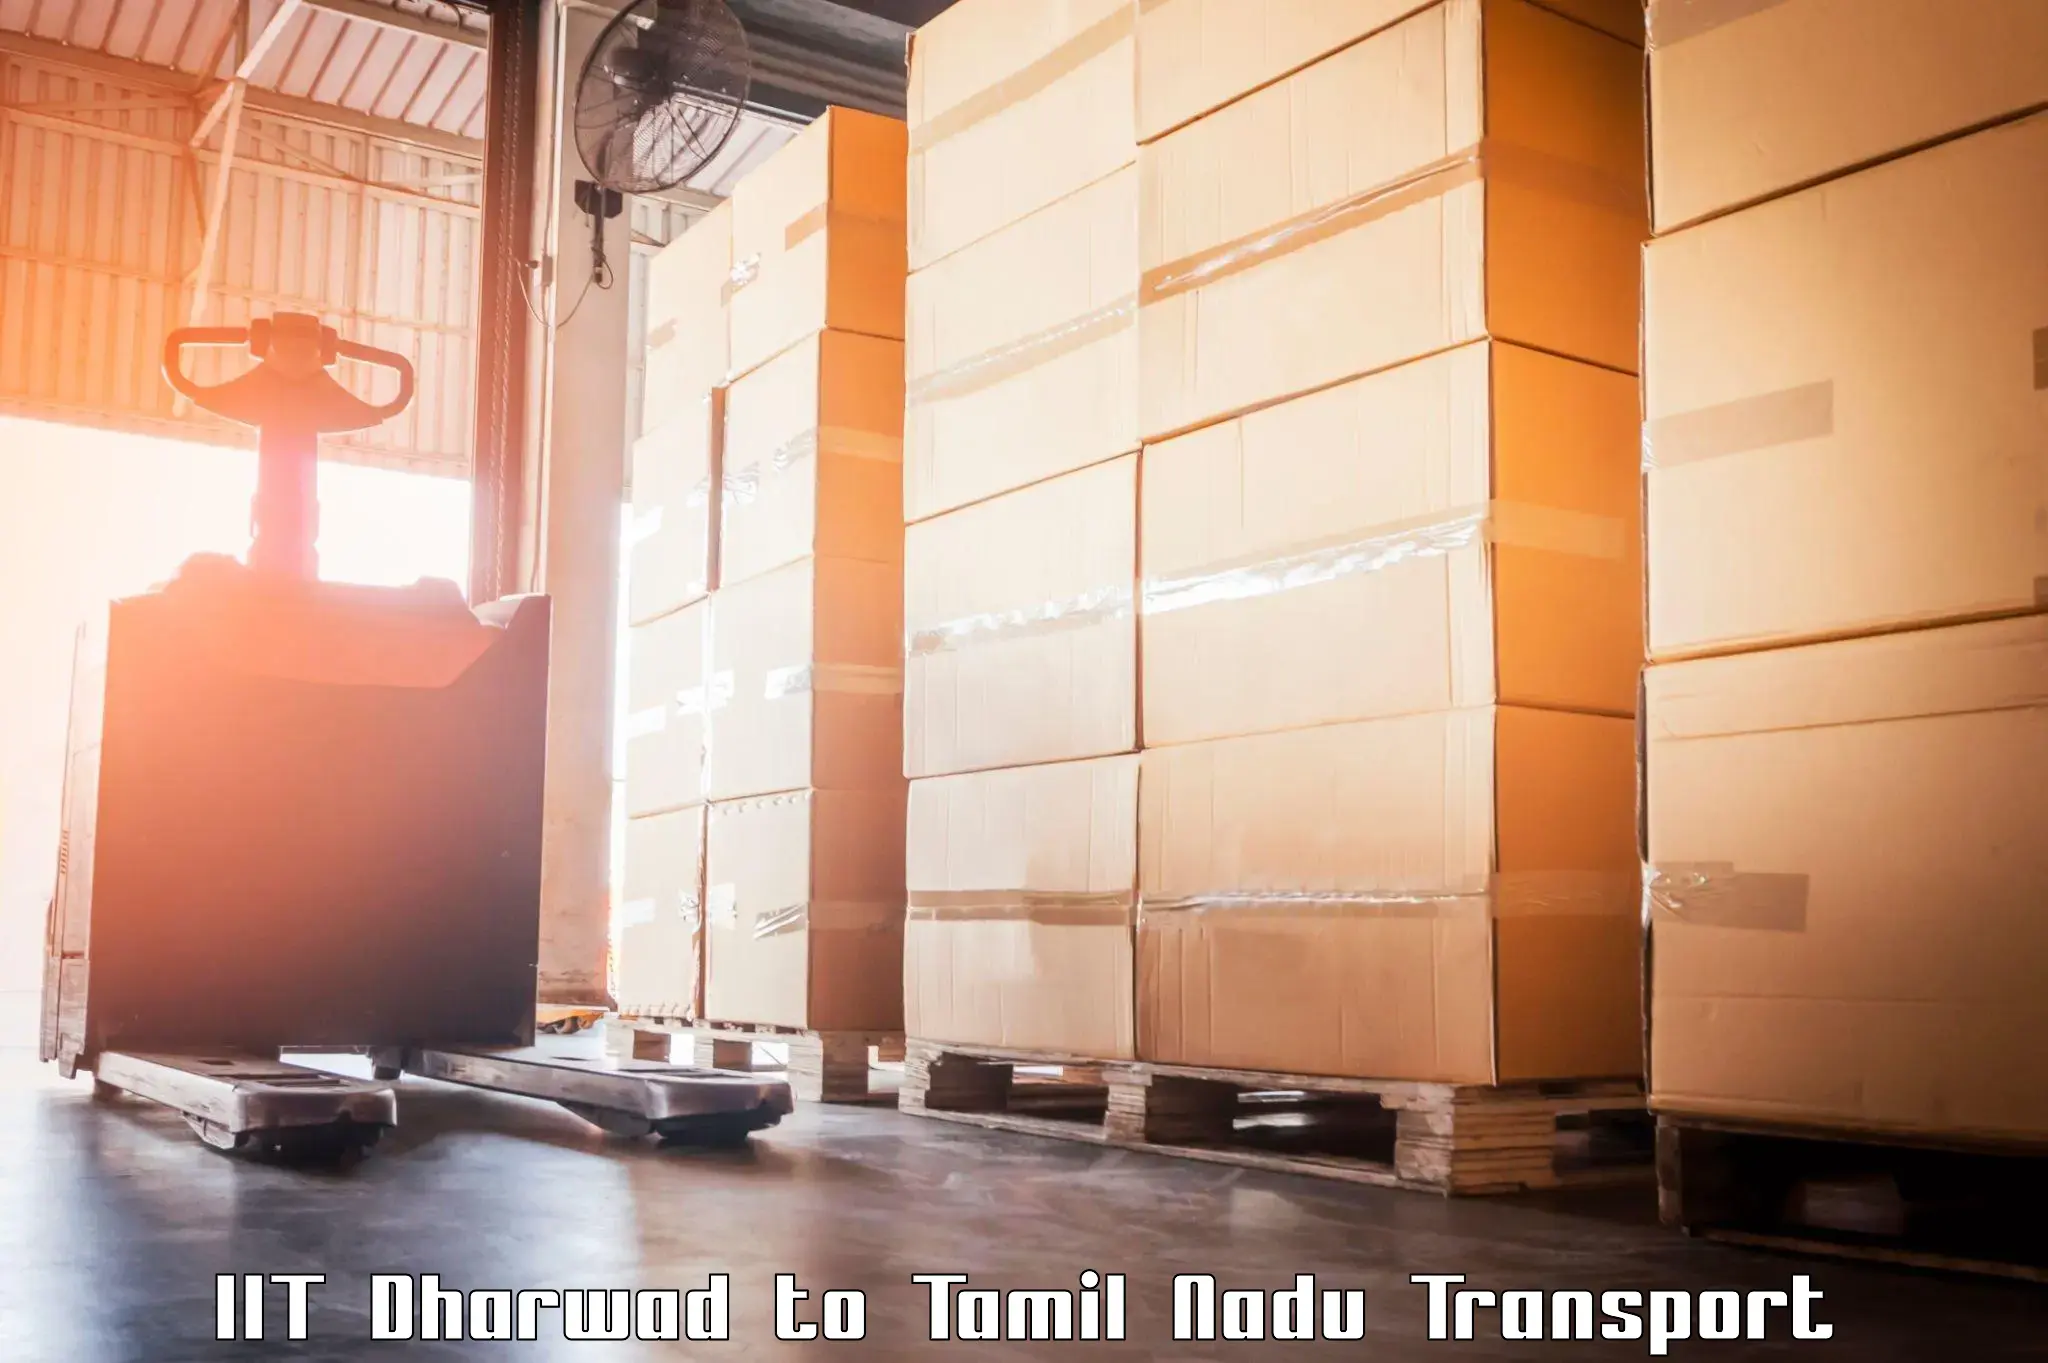 Express transport services IIT Dharwad to Hosur